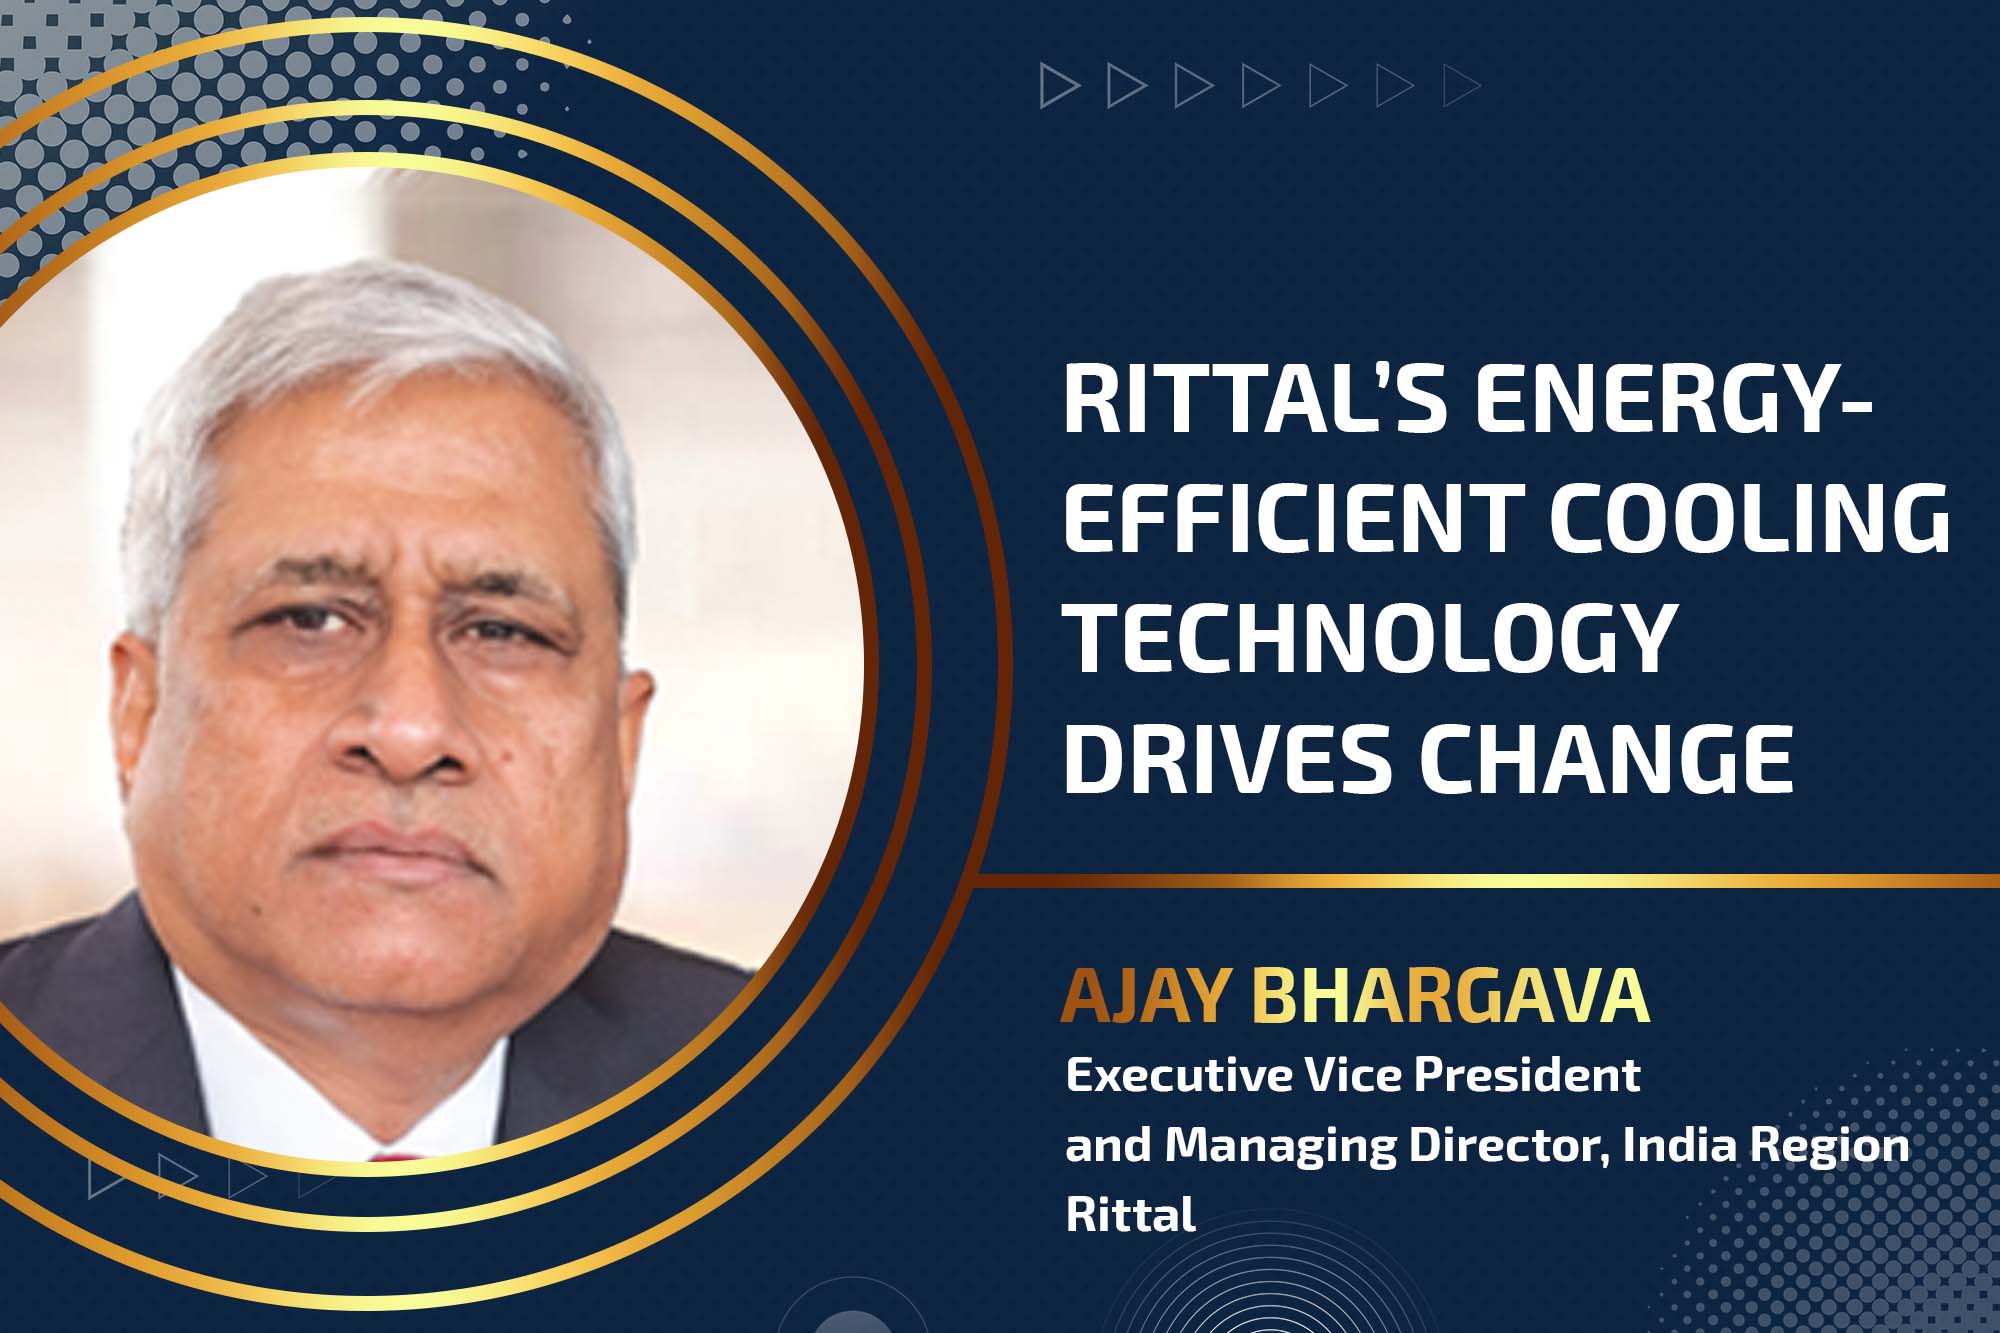 Rittal’s energy-efficient cooling technology drives change